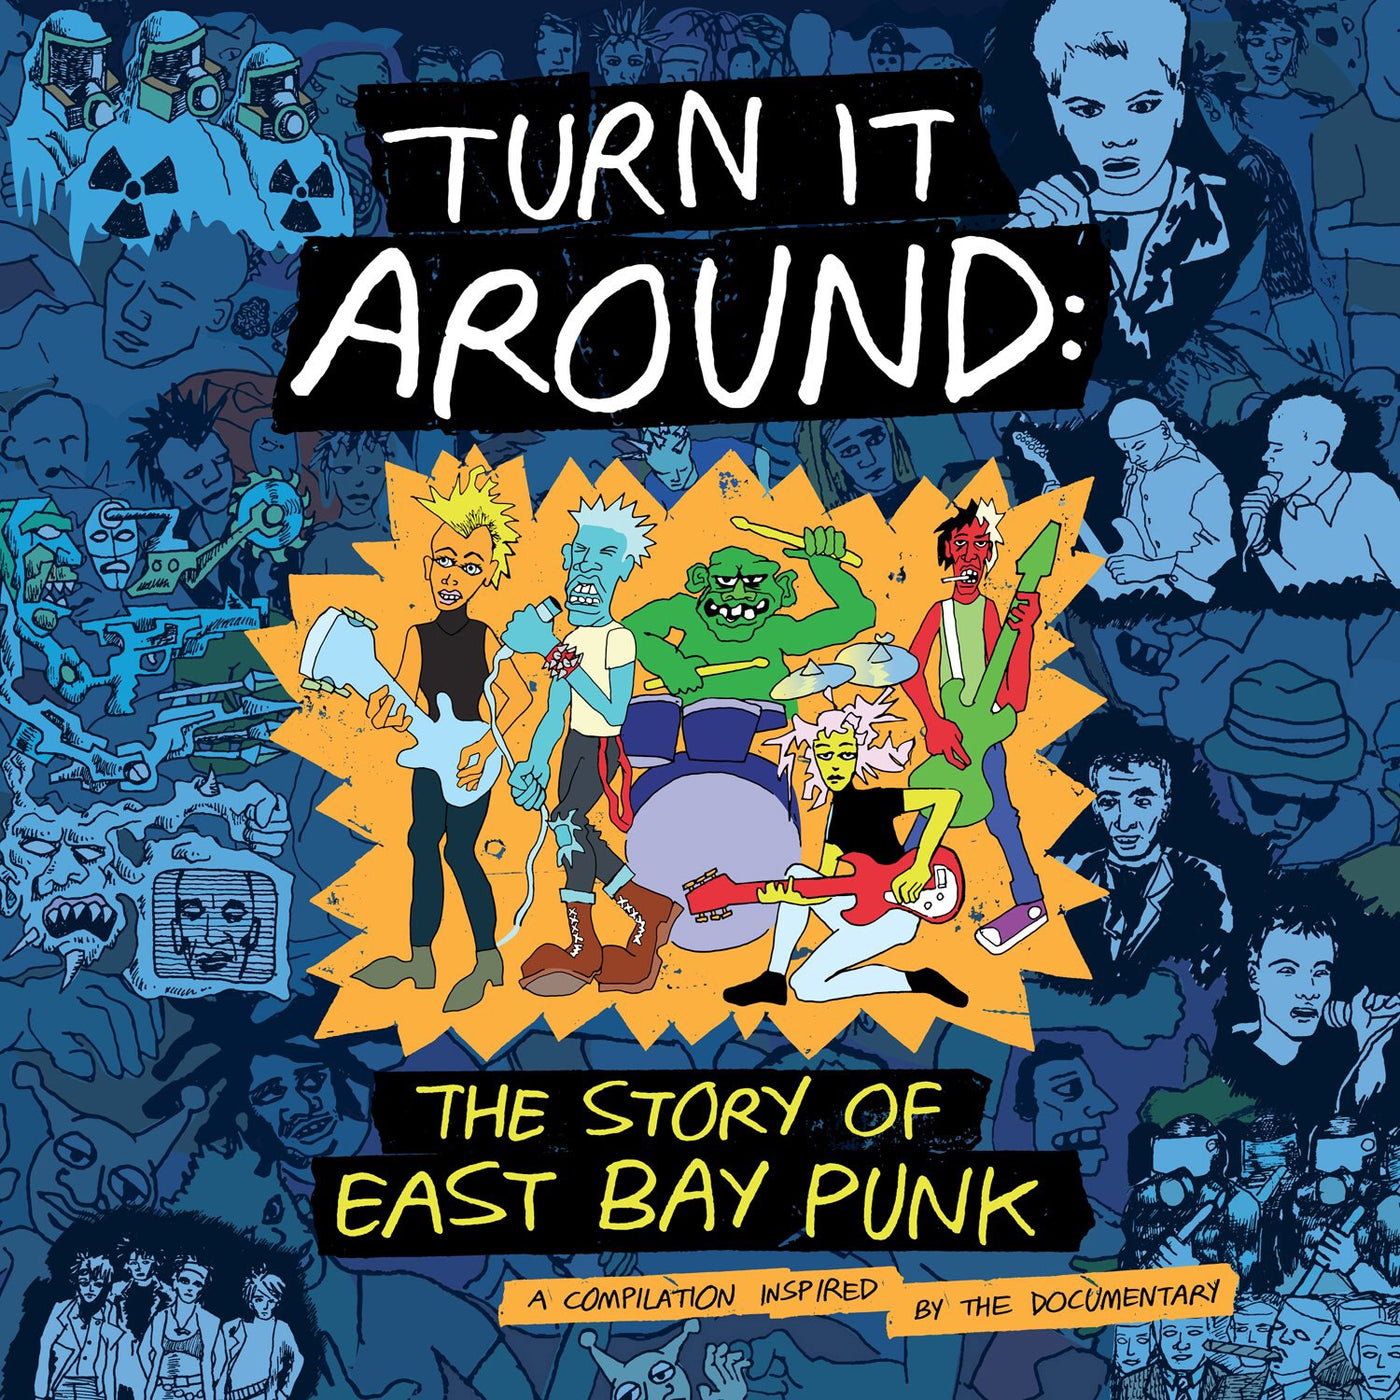 V/A - Turn It Around: The Story of East Bay Punk